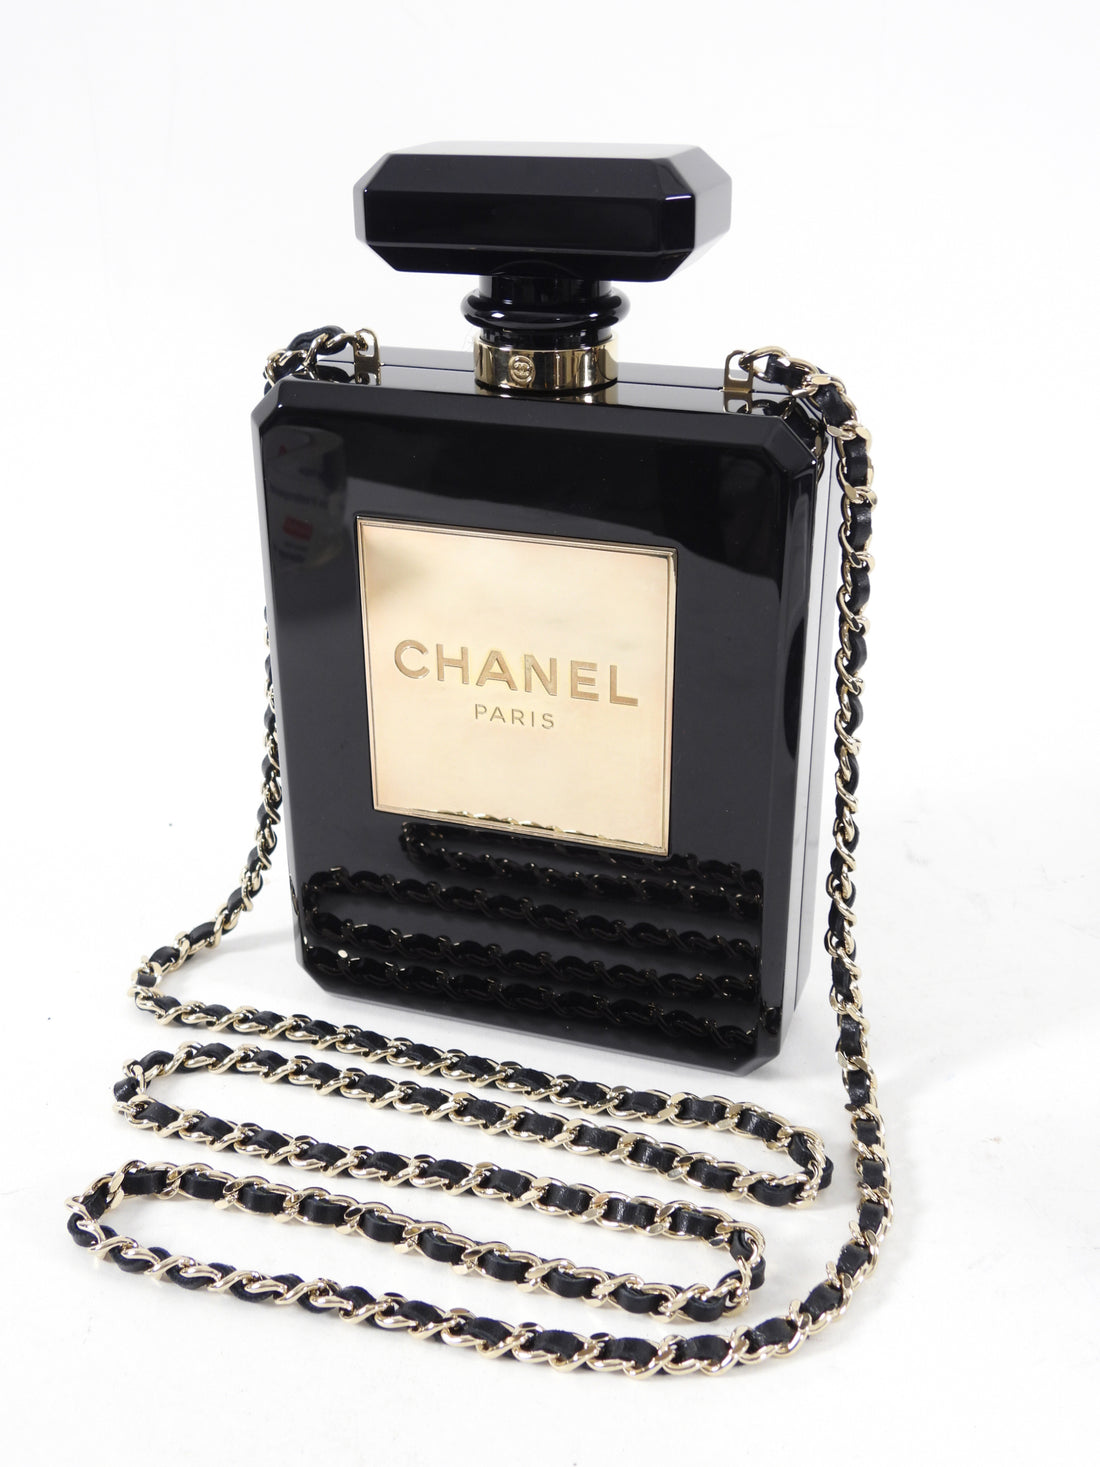 Vintage Chanel No19 Small Perfume Bottle